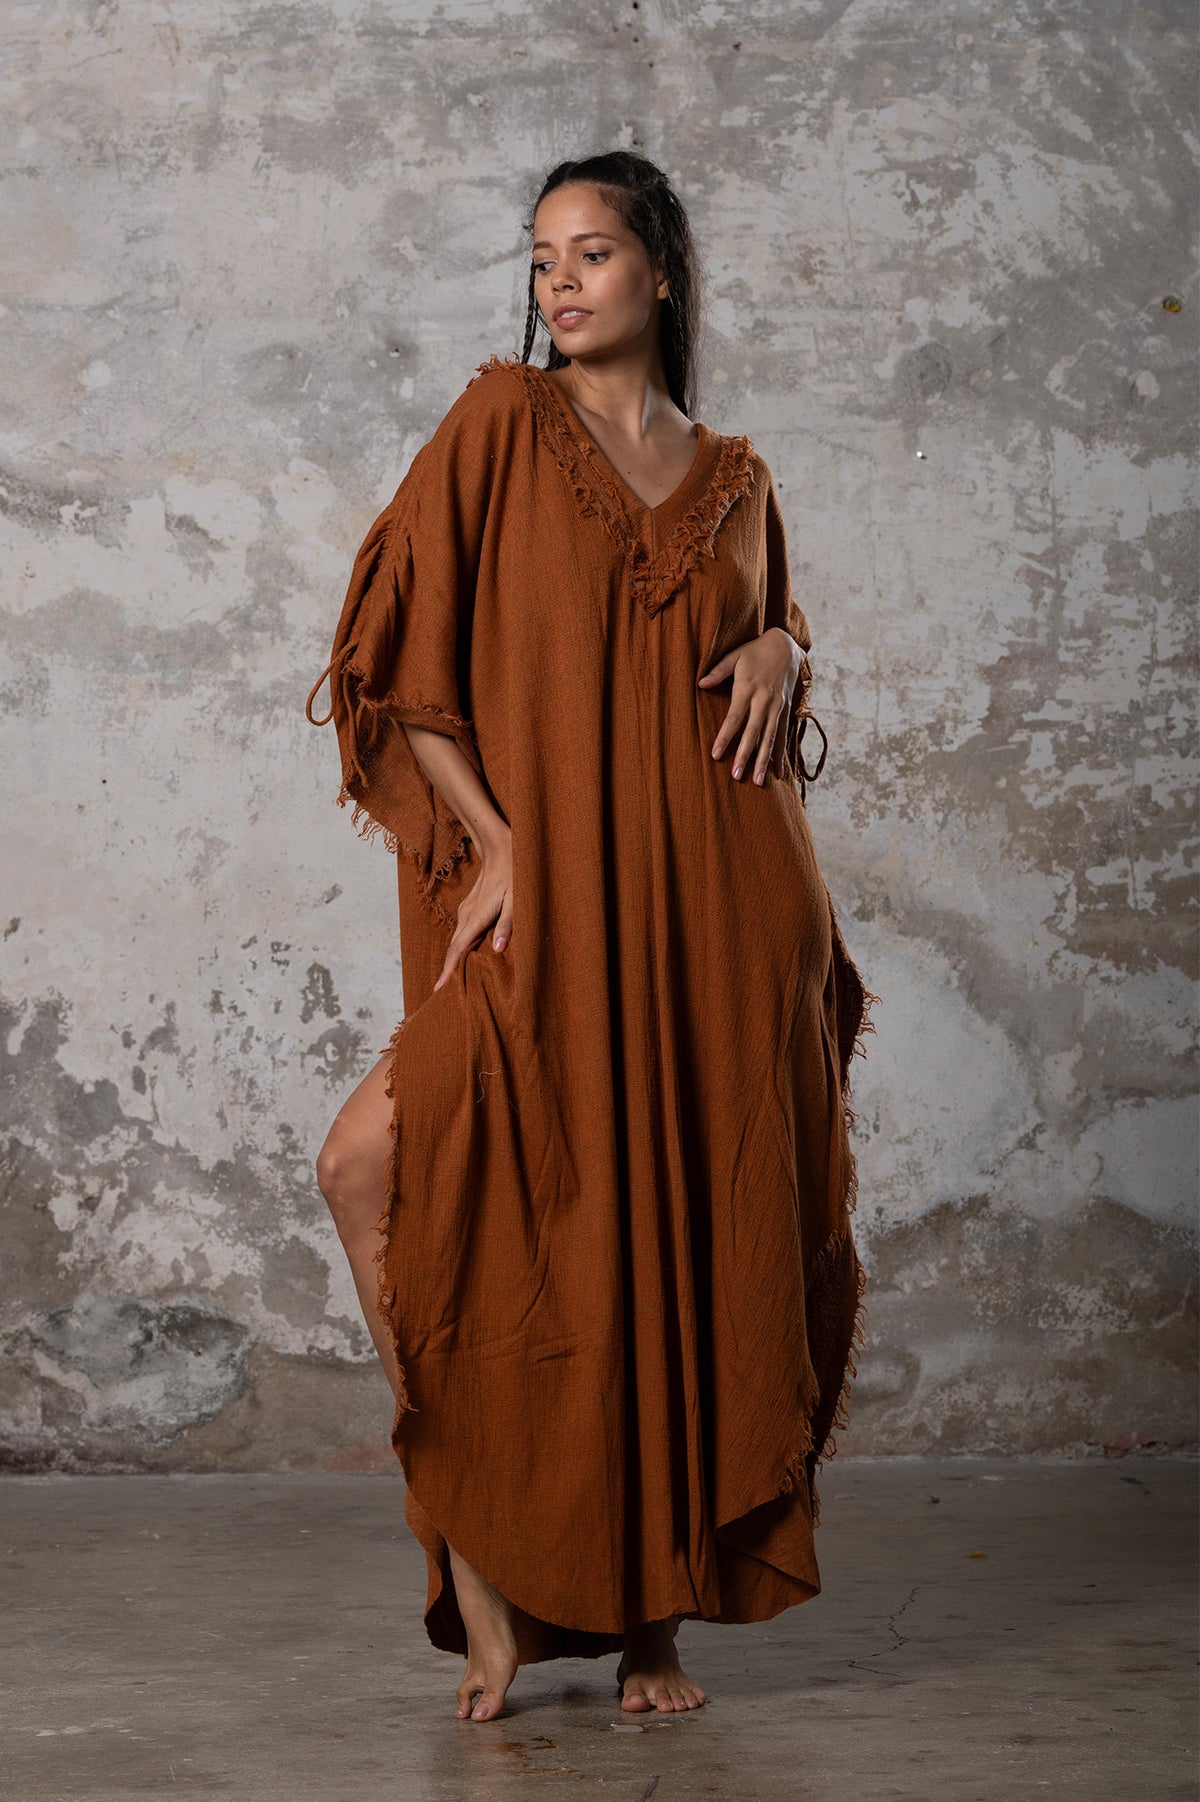 A versatile, earthy goddess dress that embodies boho-chic style. Crafted from the softest cotton fabric, this garment offers both comfort and a fashion statement. The dress can be worn in two distinct styles, either as a kaftan or a sultry dress, with a simple change in the way you put it on. Its natural and ethereal design exudes a warm, comforting feeling against your skin, making it a must-have addition to your wardrobe for those seeking a harmonious blend of style and comfort.